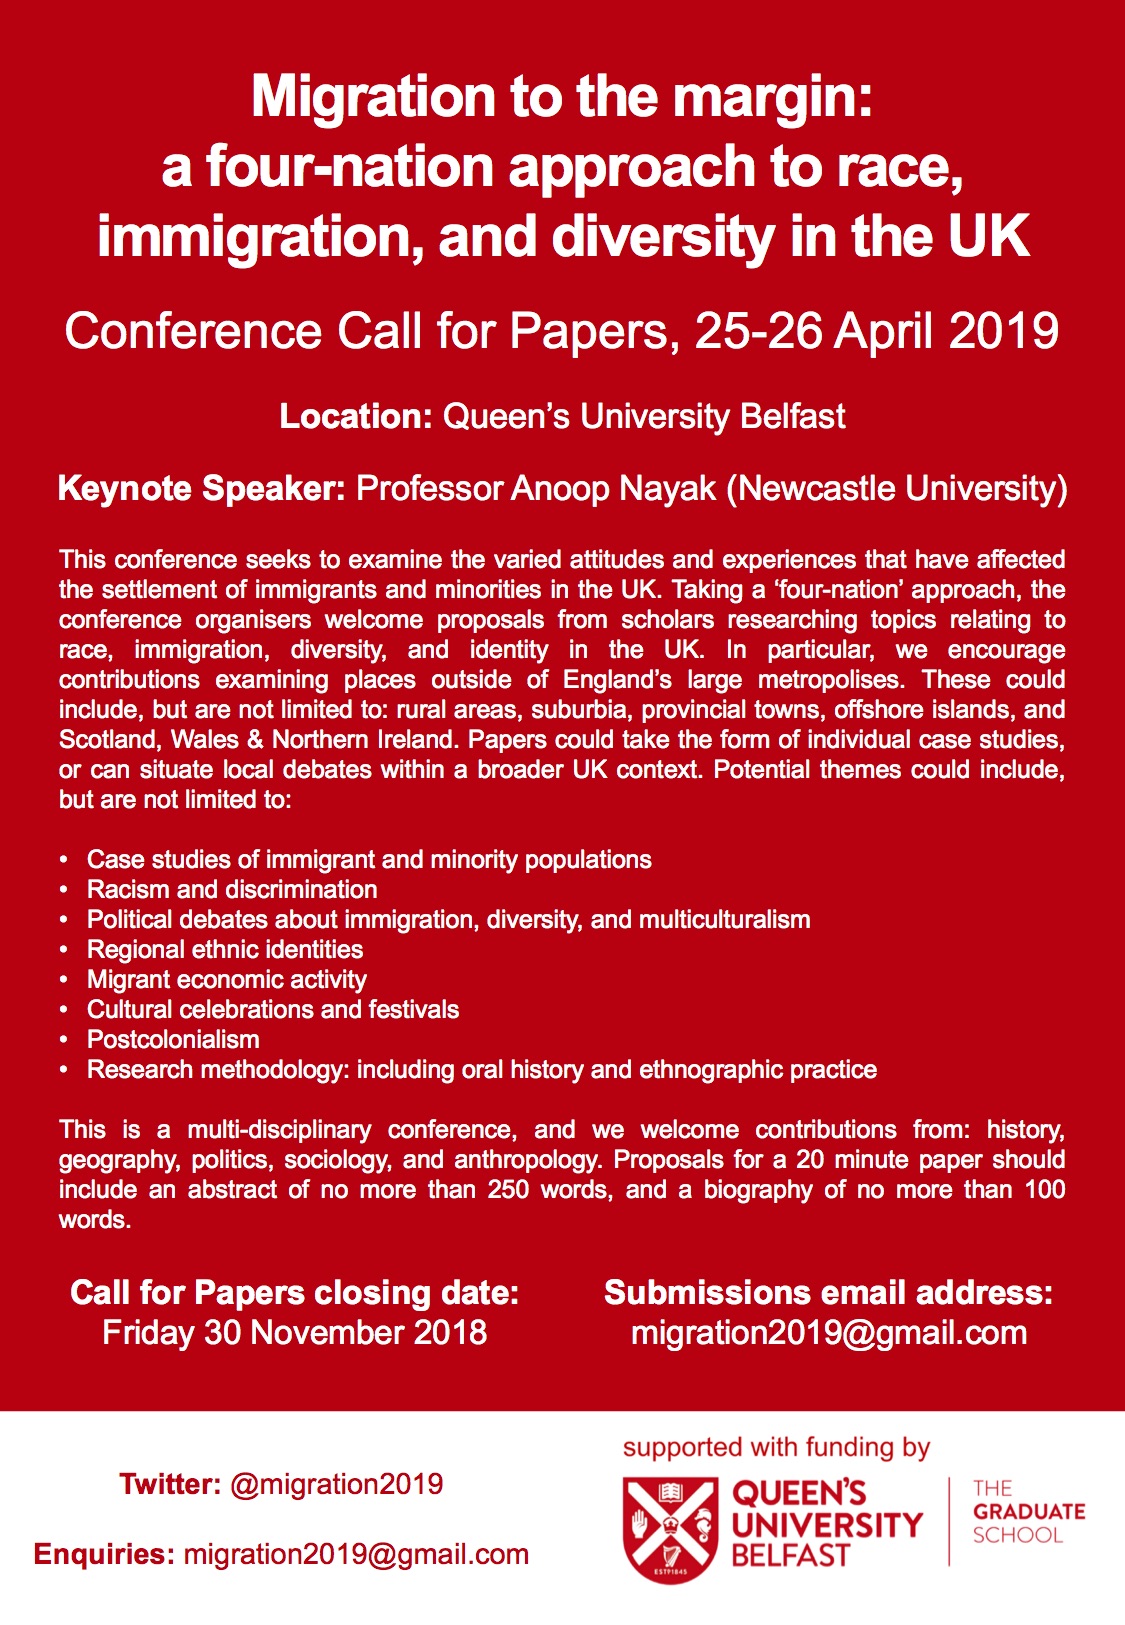 Migration to the margin - call for papers poster - 25 April 2019